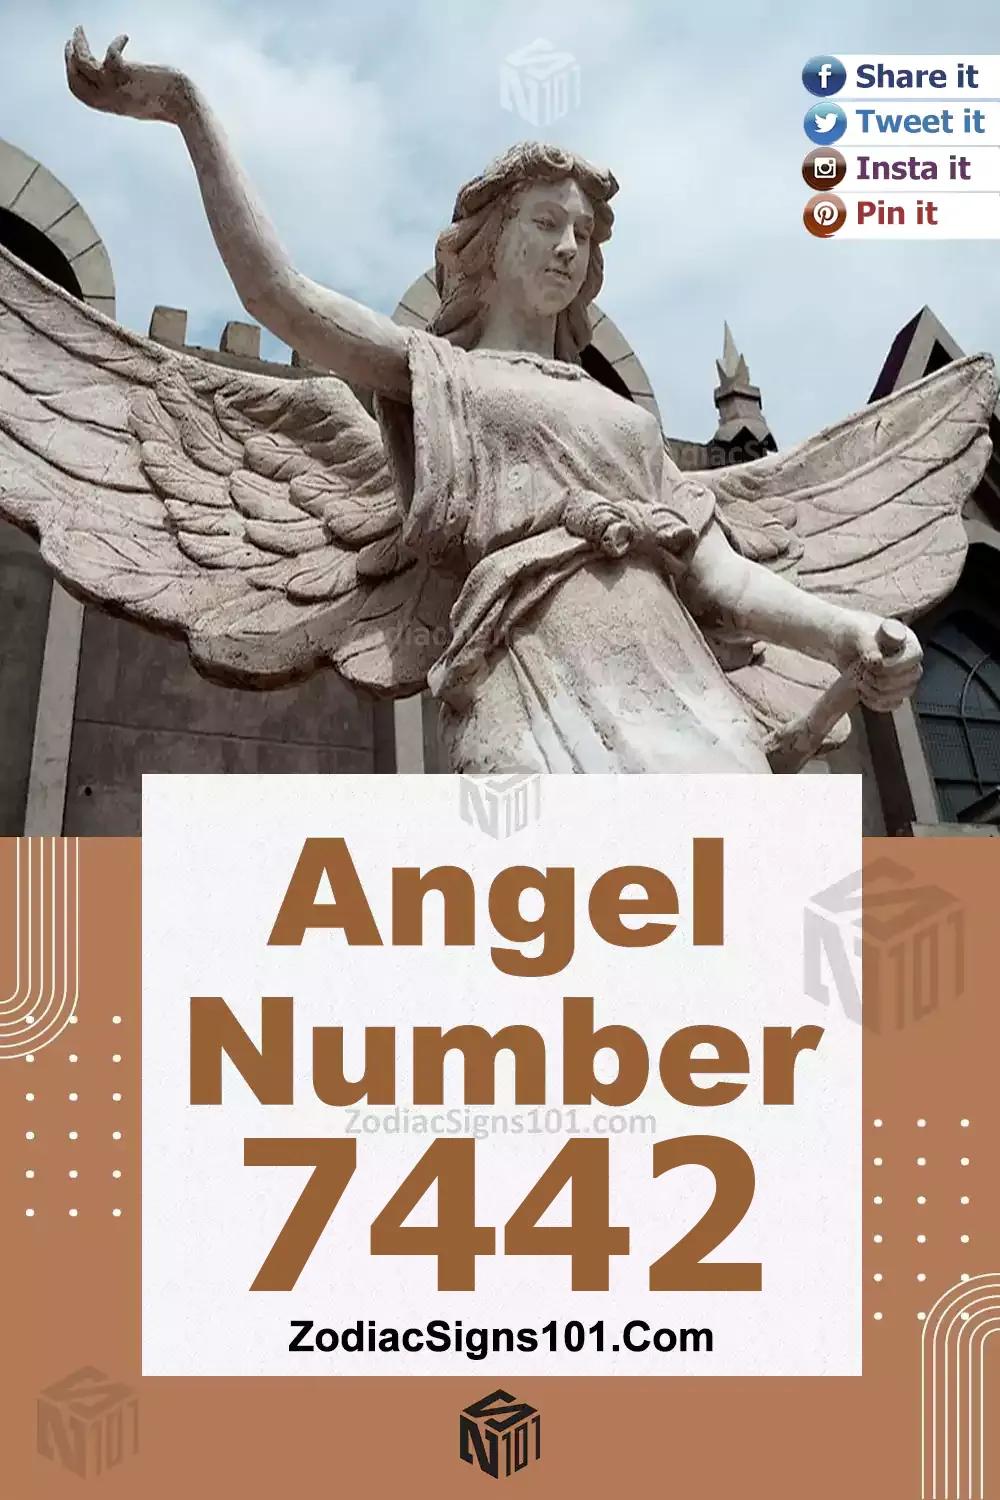 7442 Angel Number Meaning